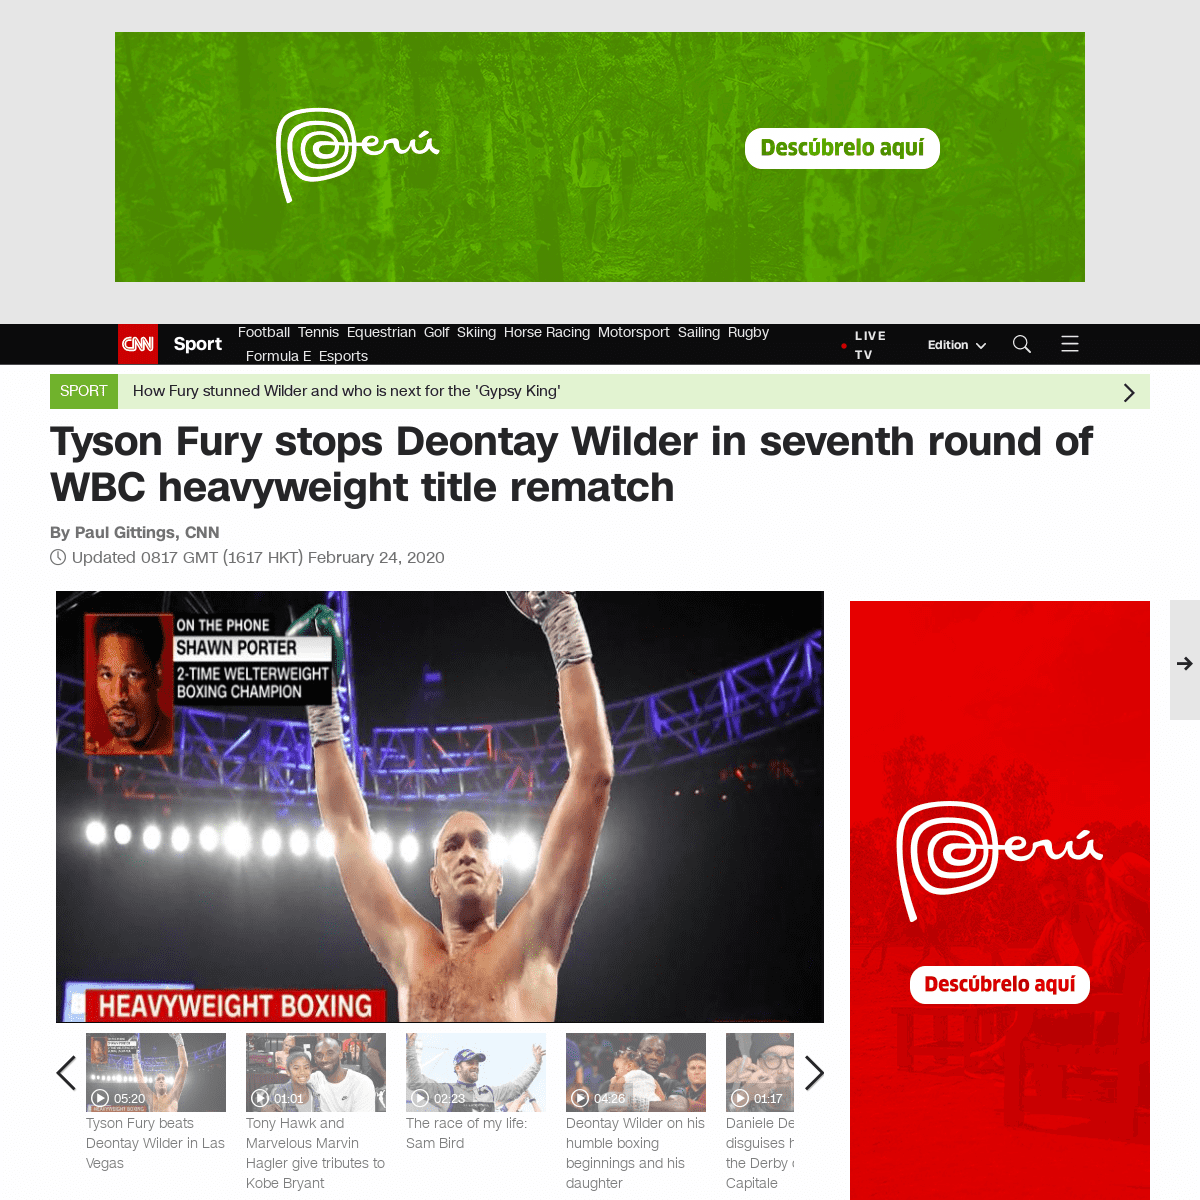 A complete backup of edition.cnn.com/2020/02/23/sport/fury-wilder2-heavyweight-title-rematch-las-vegas/index.html